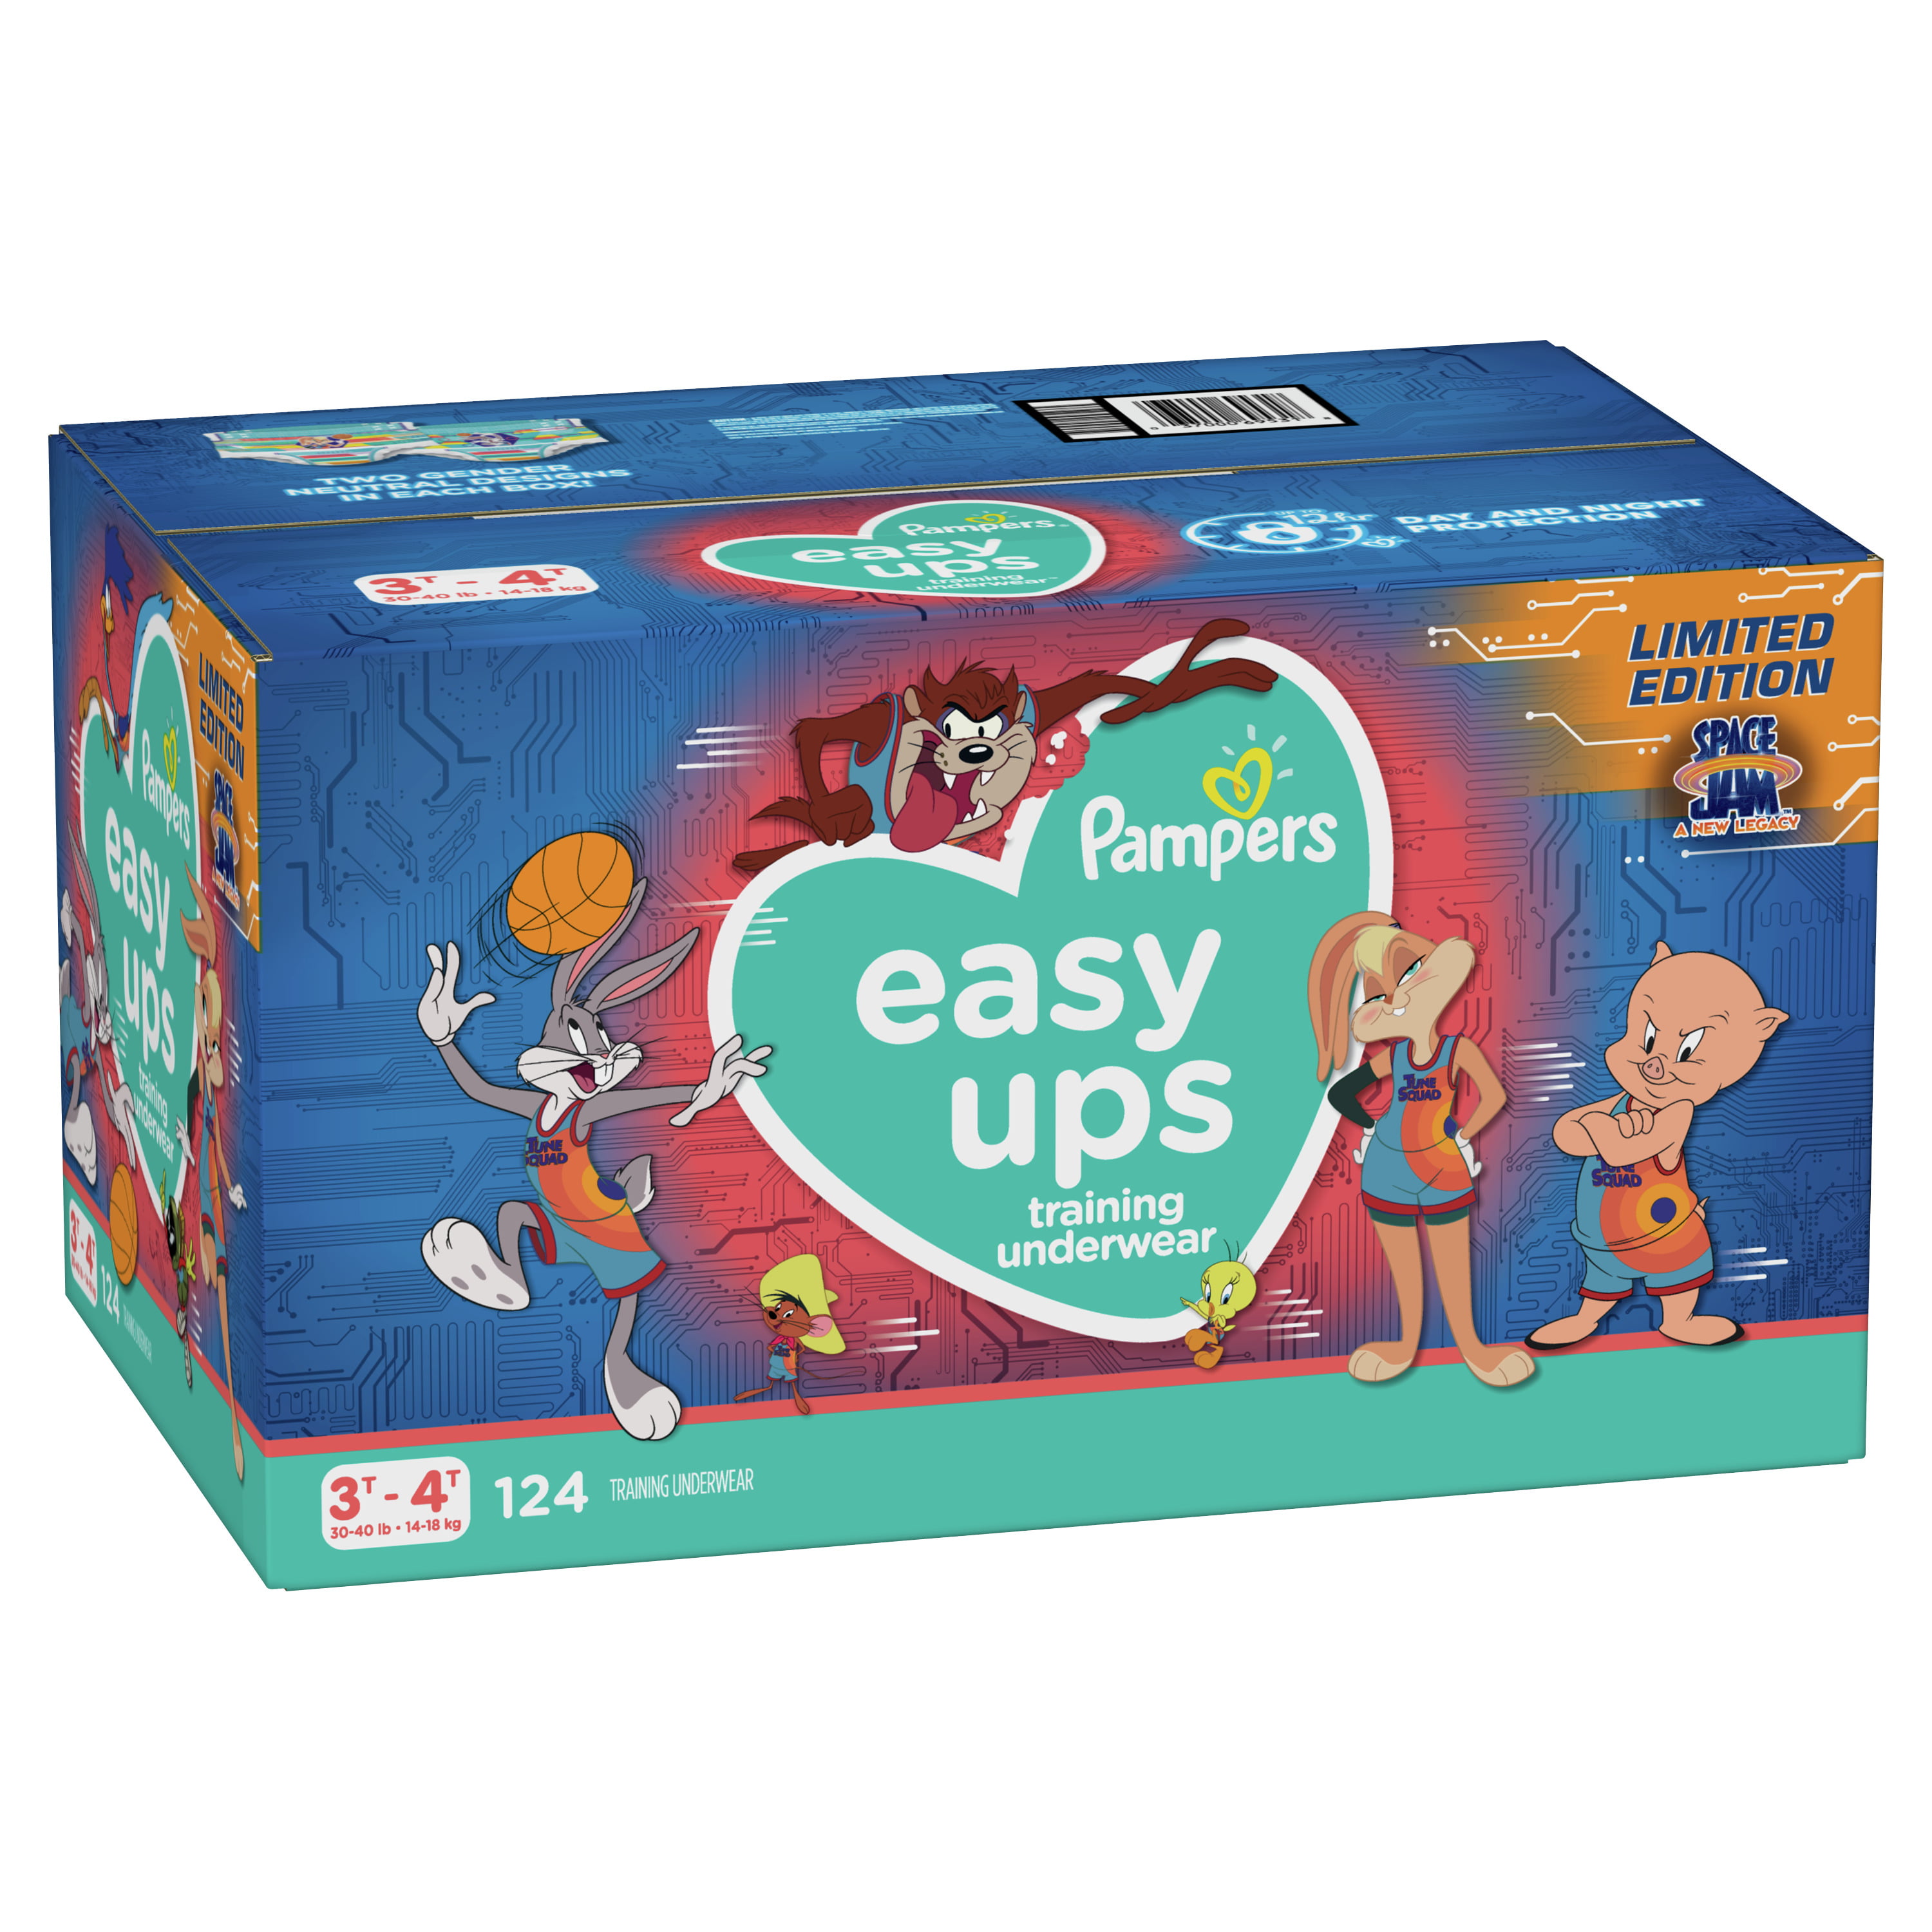 Pampers Easy Ups Unisex Training Underwear, 3T - 4T, 124 Count 